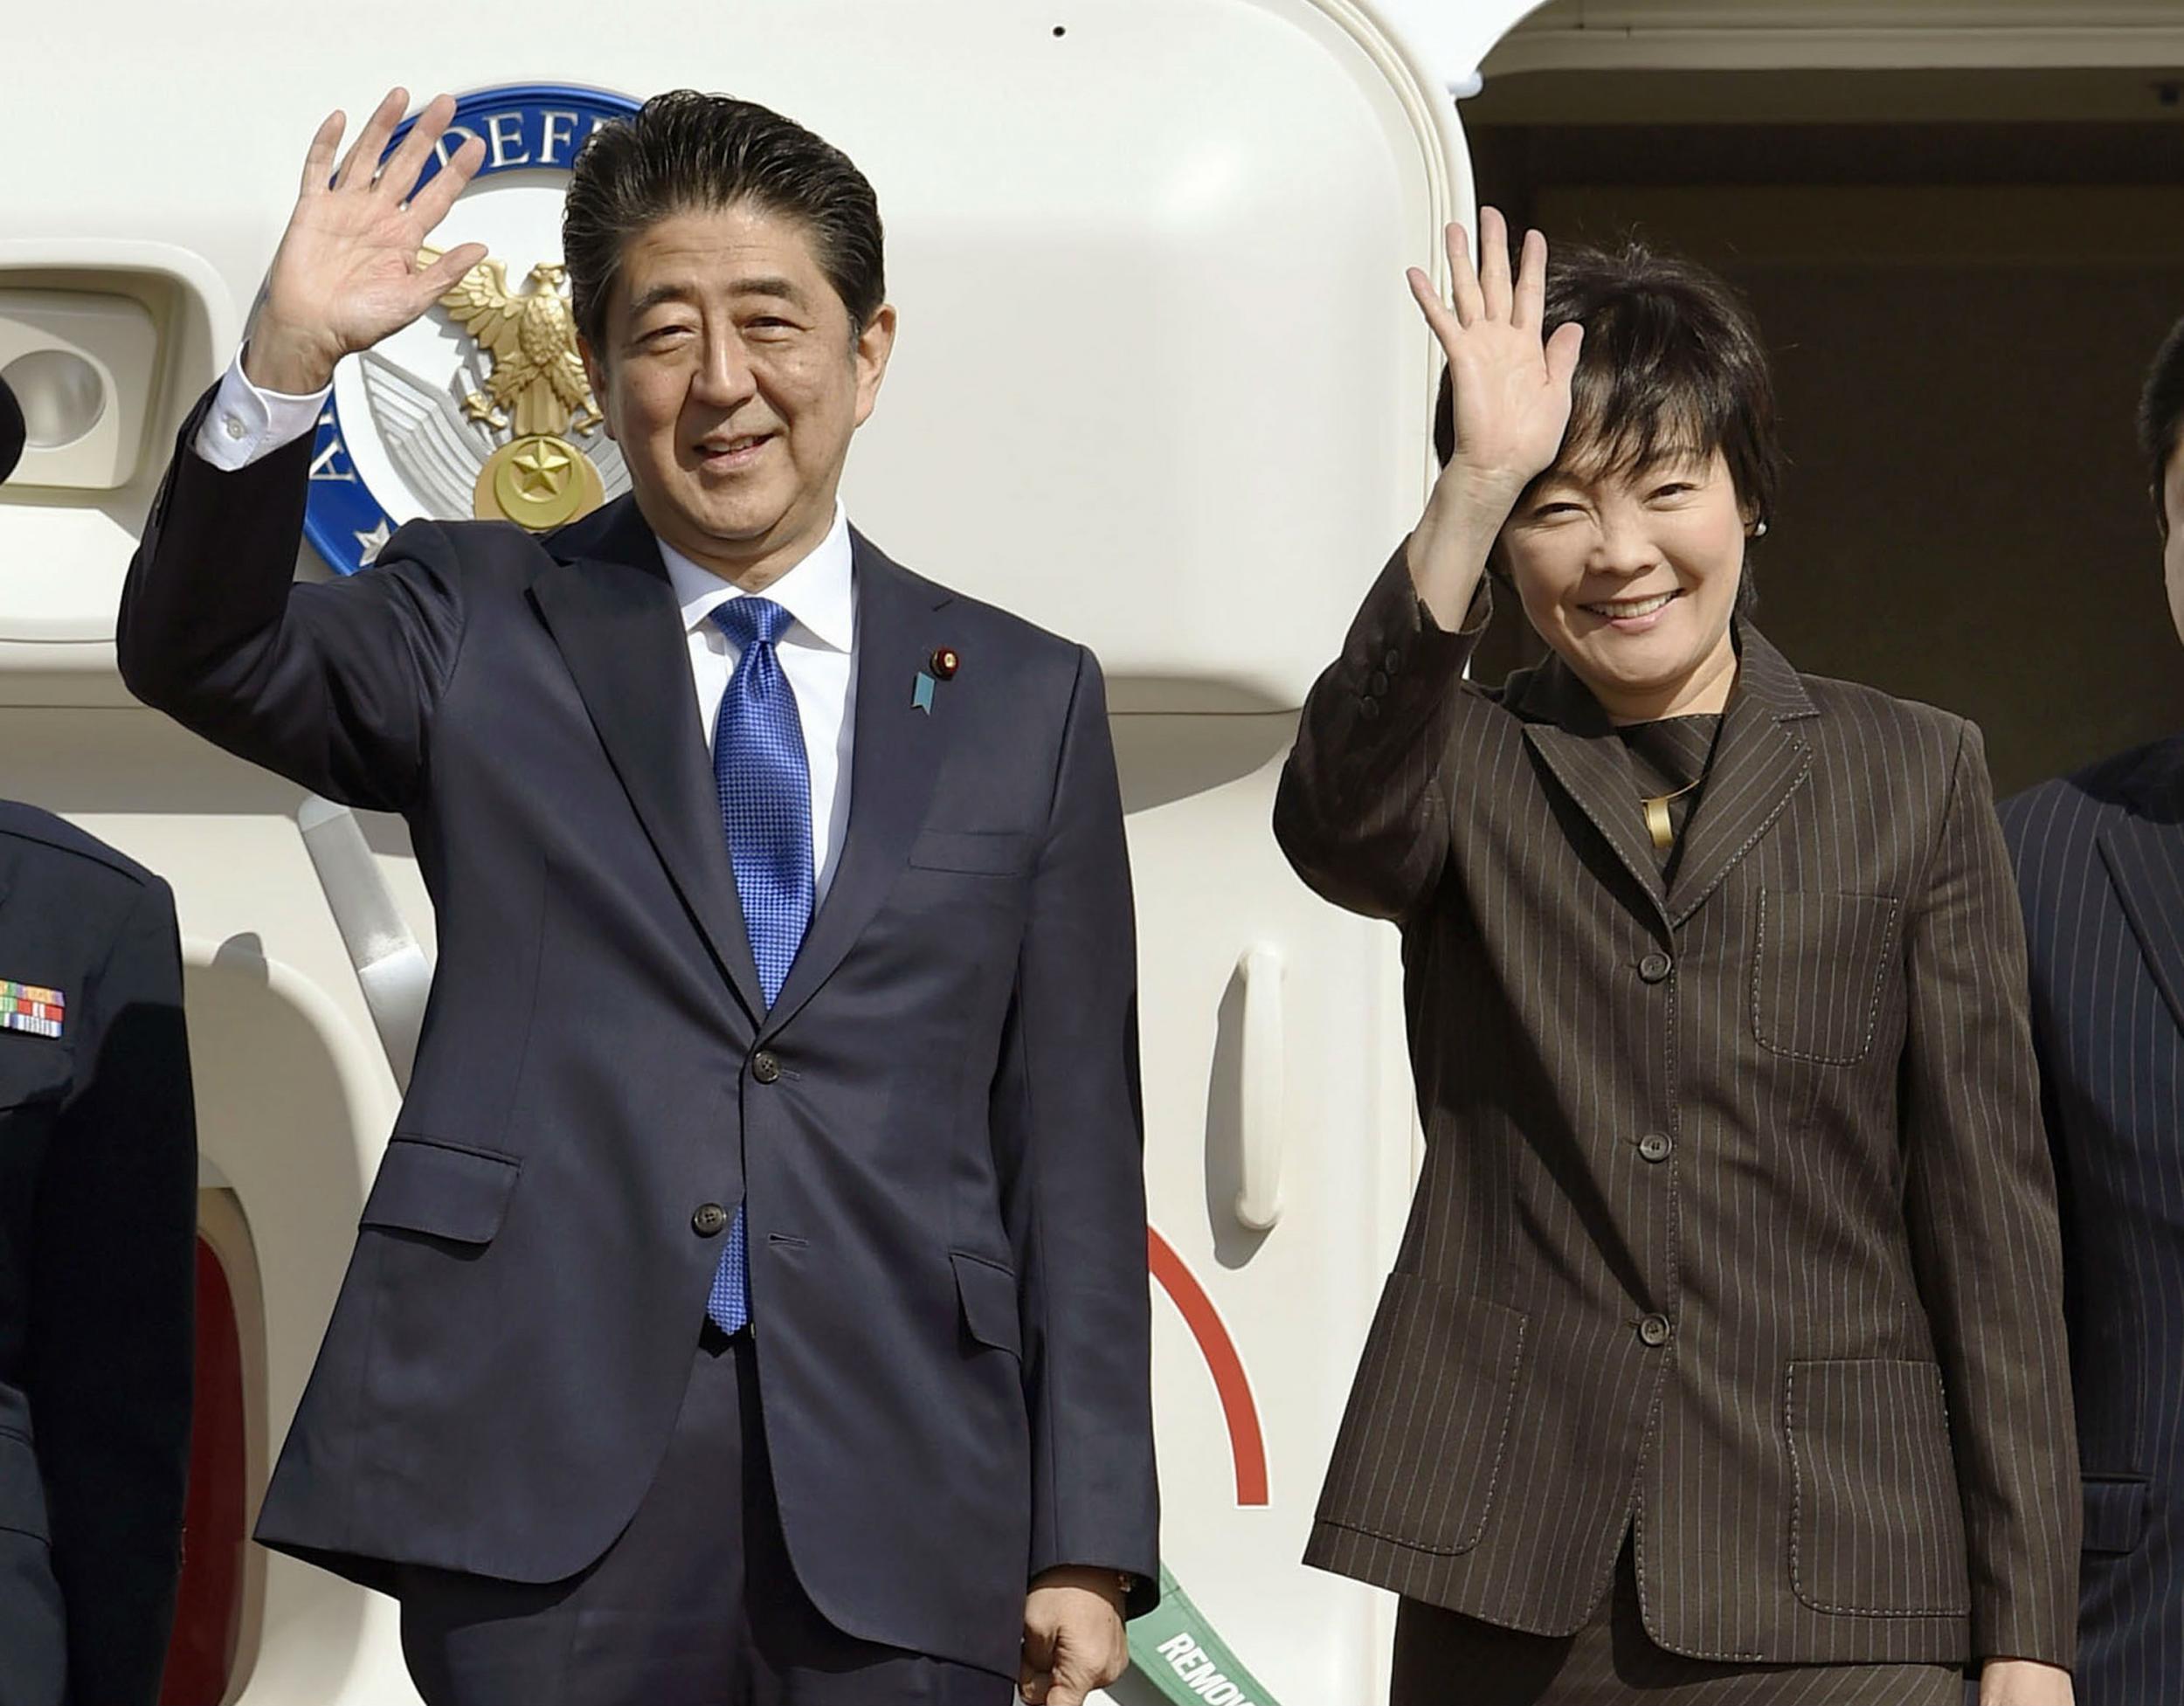 Prime Minister Shinzo Abe and his wife depart Tokyo for talks with President-elect Trump